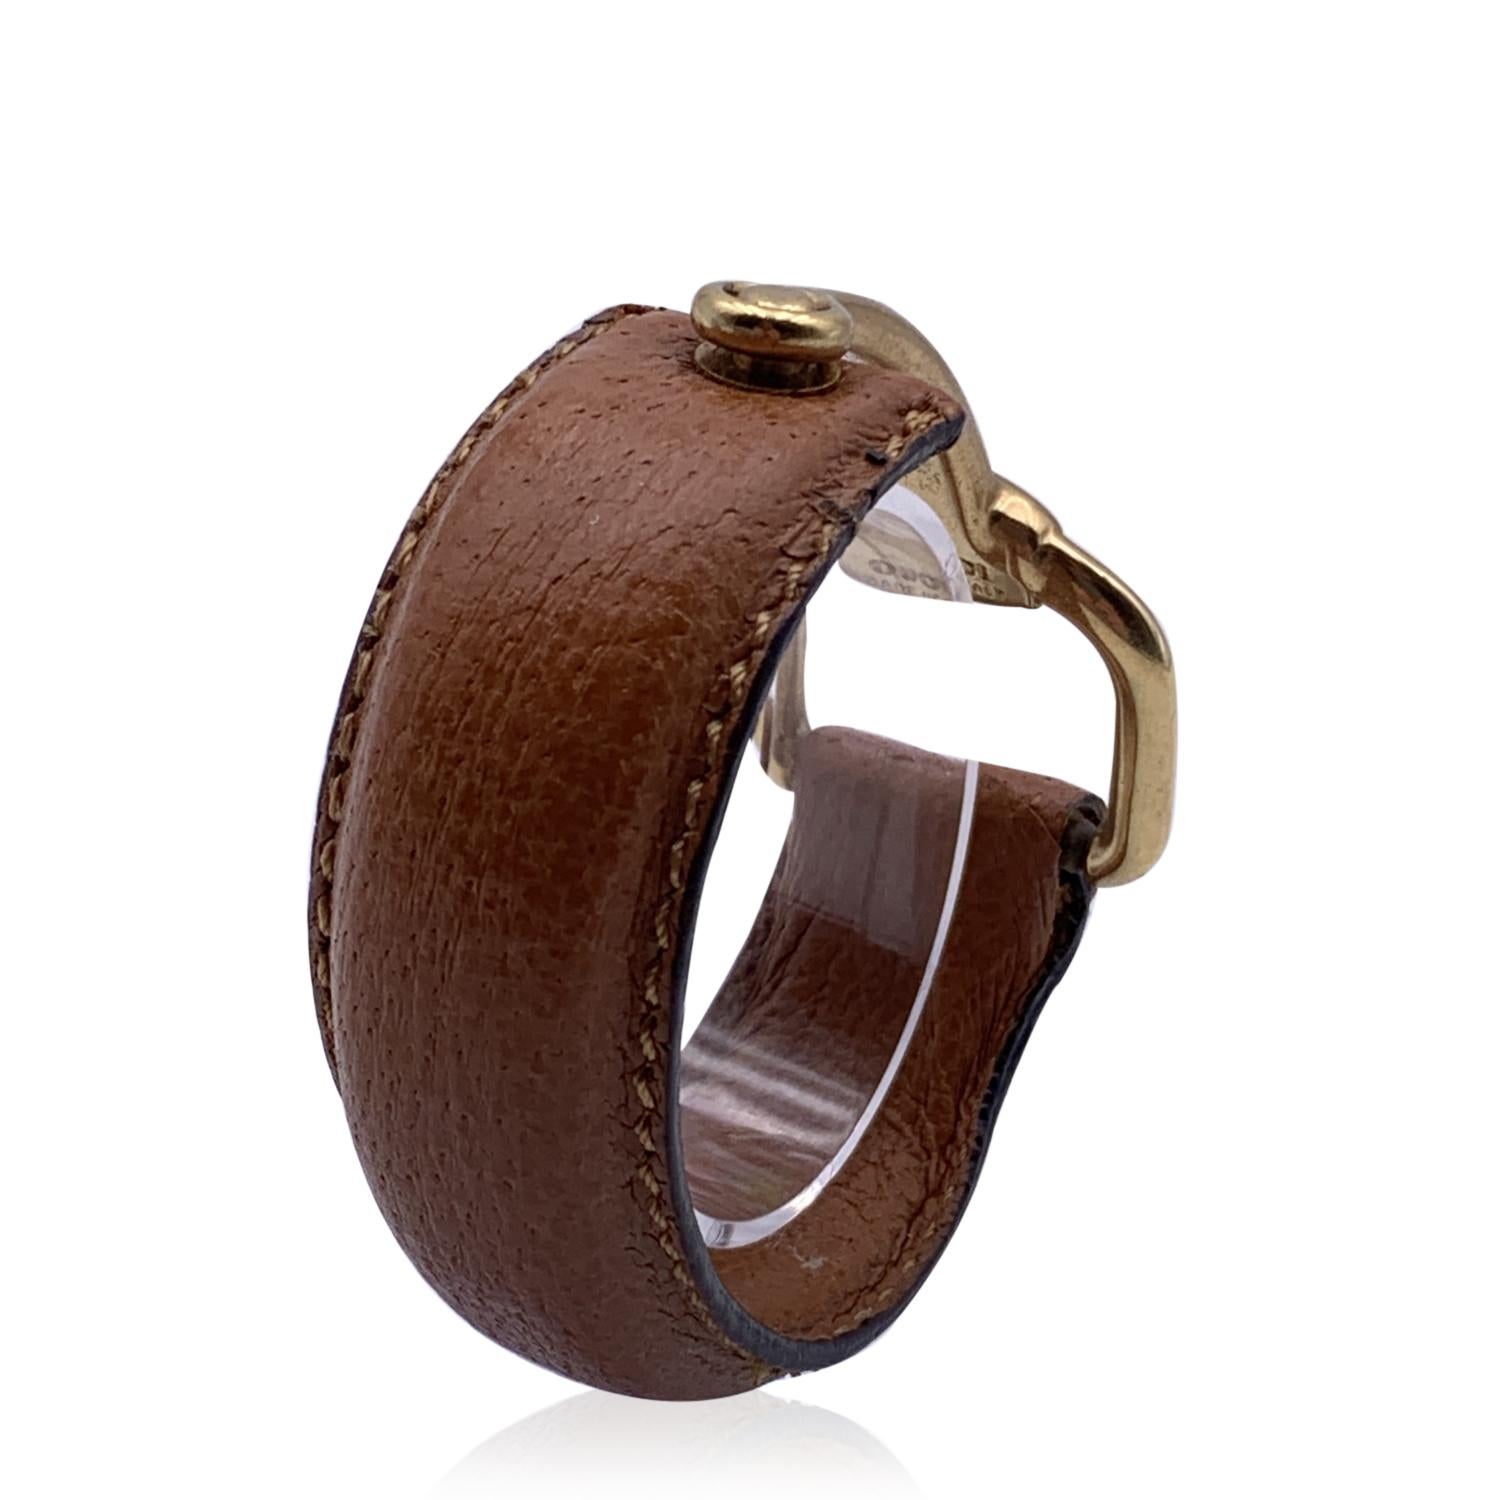 Vintage beautiful cuff bracelet by Gucci. Made in tan leather, it features an gold metal half-horsebit. Will fit up to approx. 6.5 inches - 16.5 cm wrist. Width: 0.75 inches - 2 cm. 'Gucci - made in Italy' engraved on the reverse of the